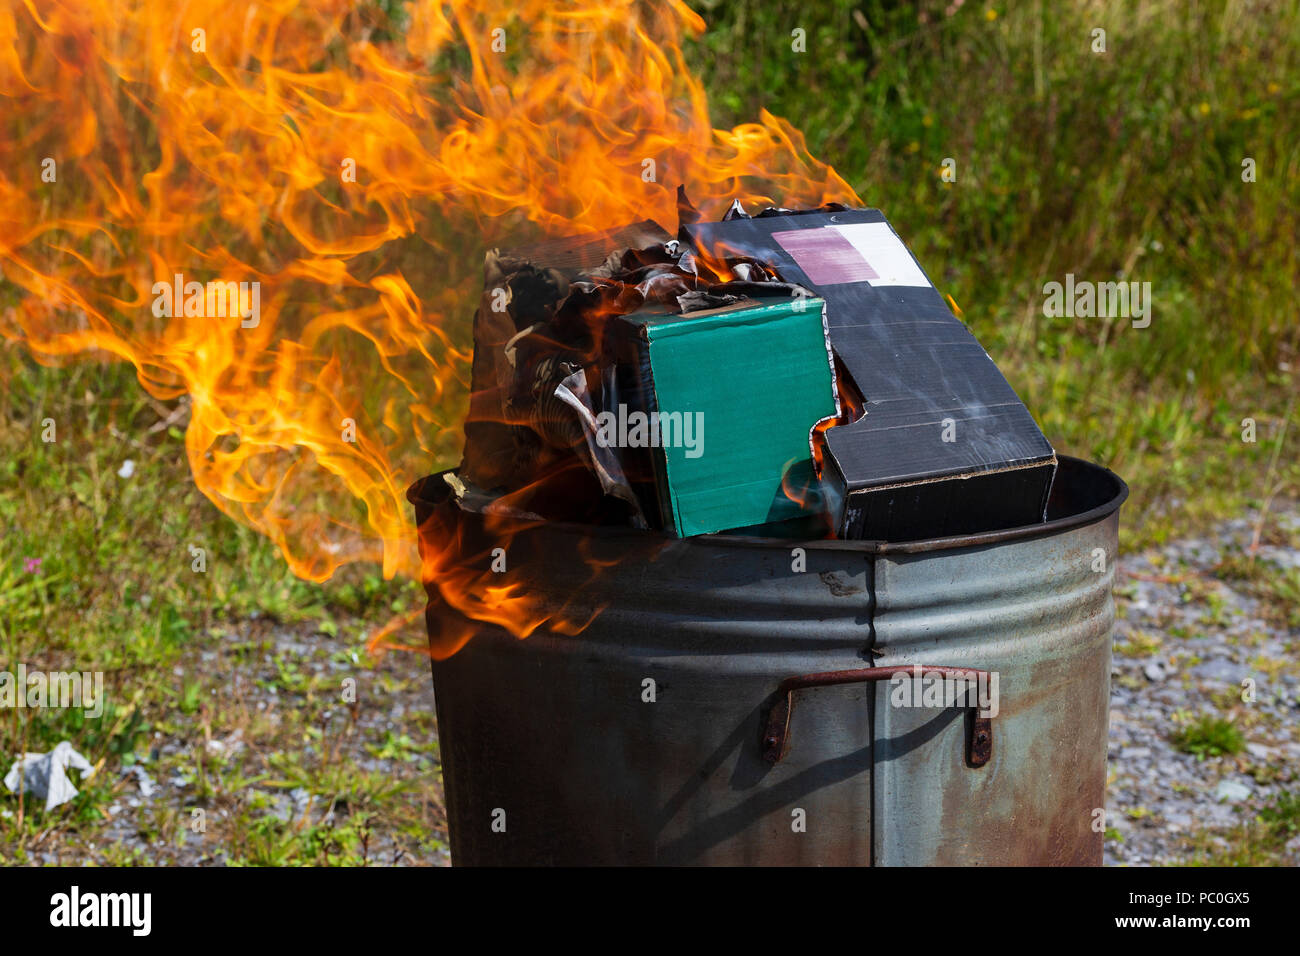 https://c8.alamy.com/comp/PC0GX5/burning-waste-paper-and-cardboard-in-small-garden-incinerator-PC0GX5.jpg